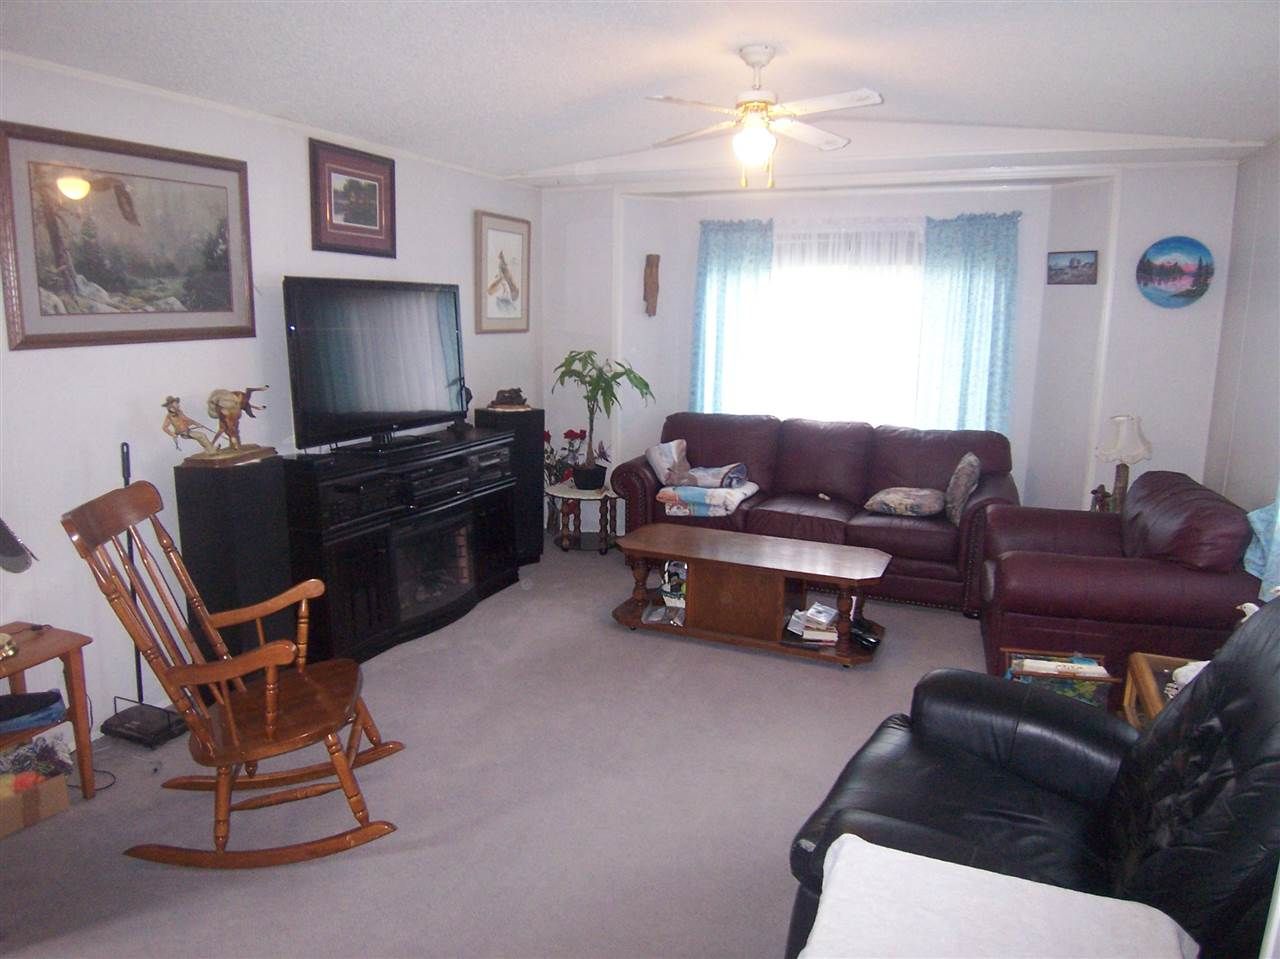 Photo 9: Photos: 3066 YENDRYAS Road in Quesnel: Quesnel Rural - South Manufactured Home for sale (Quesnel (Zone 28))  : MLS®# R2062952